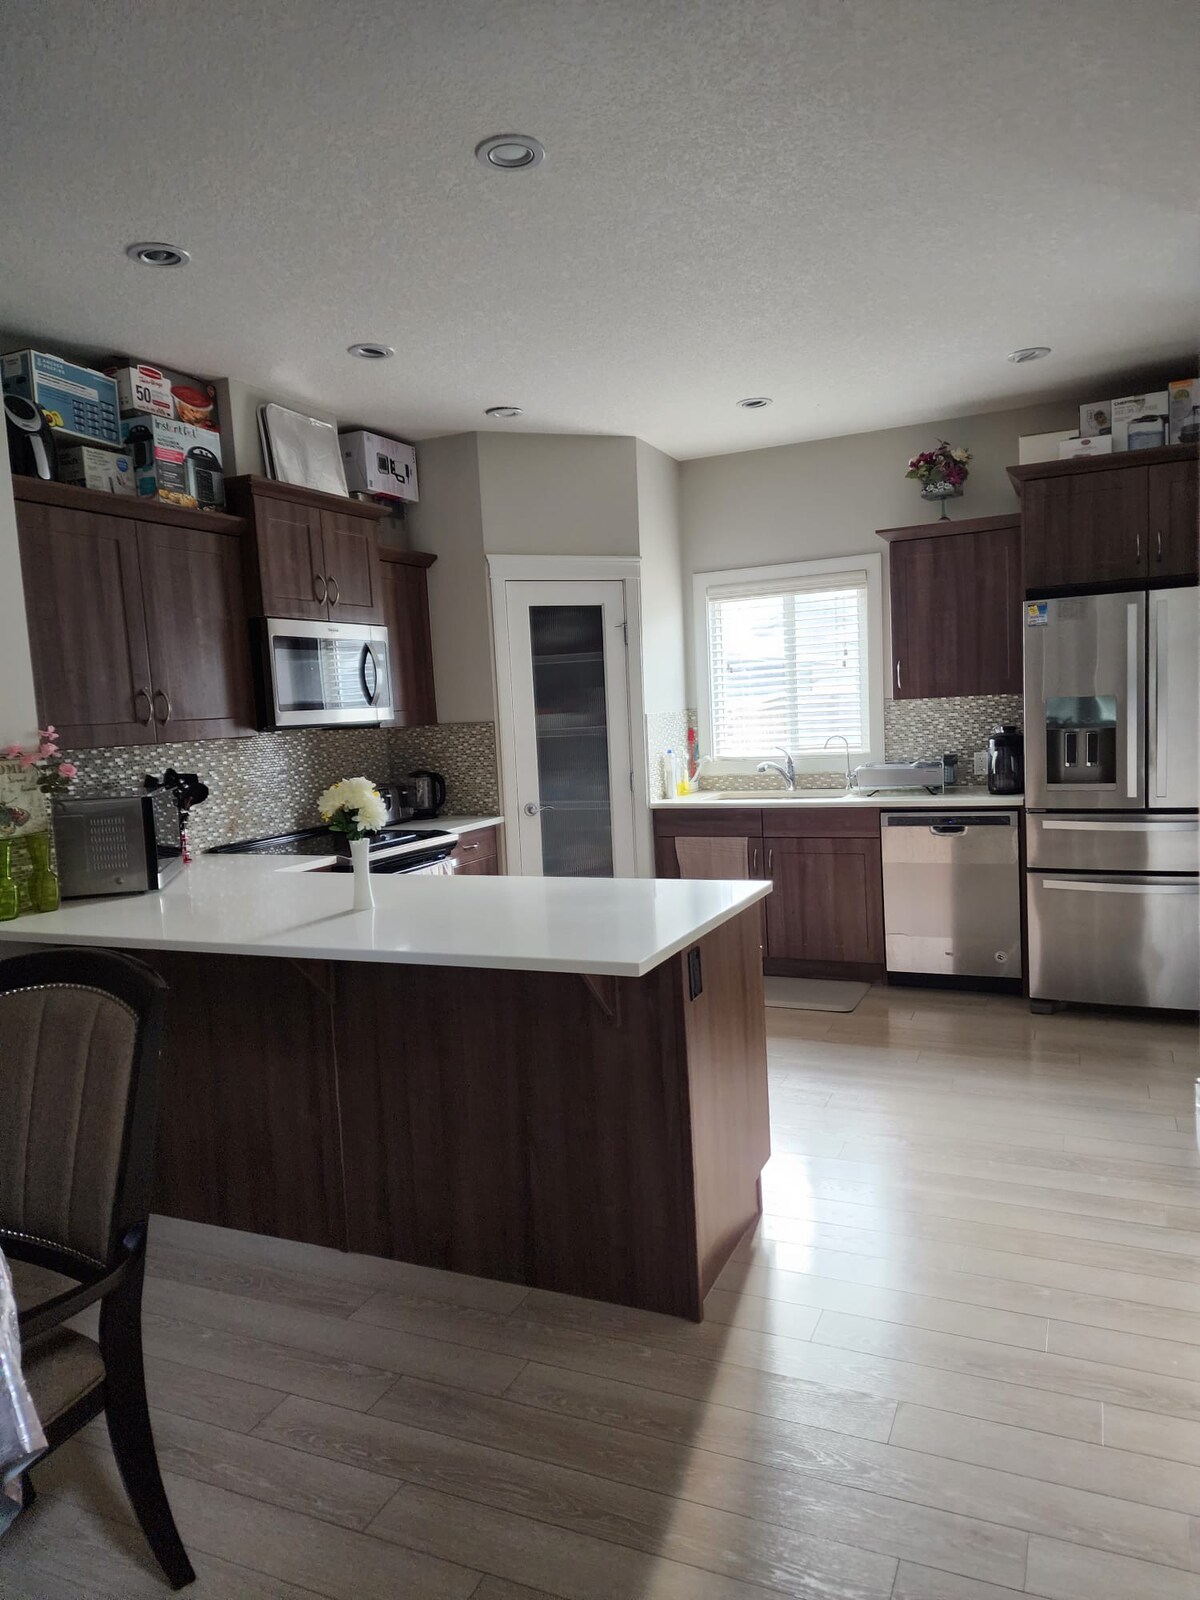 Private double bdrm, Airdrie near Calgary airport